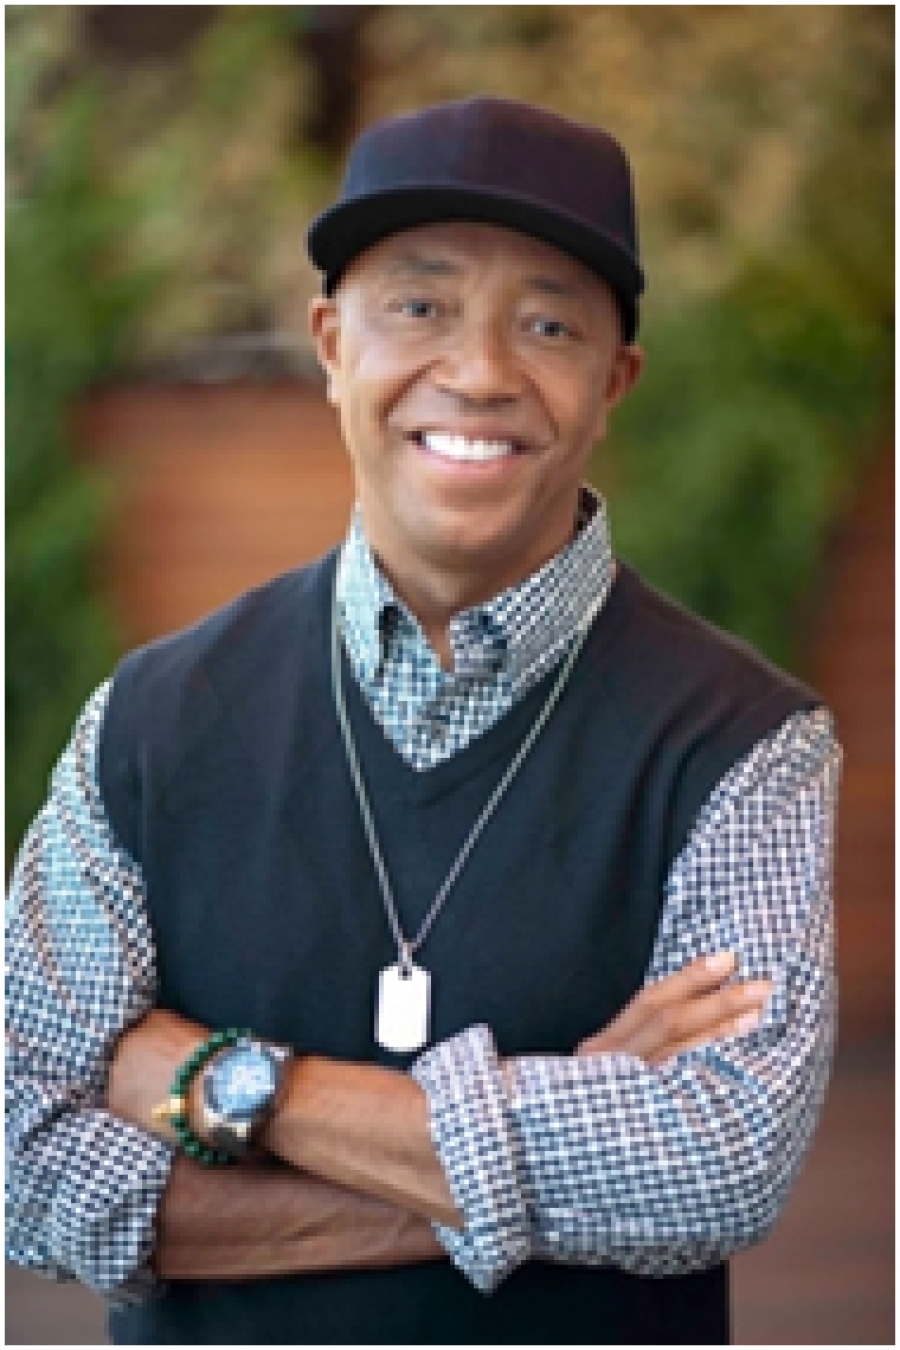 The Vegan & Vegetarian Movement with Russell Simmons